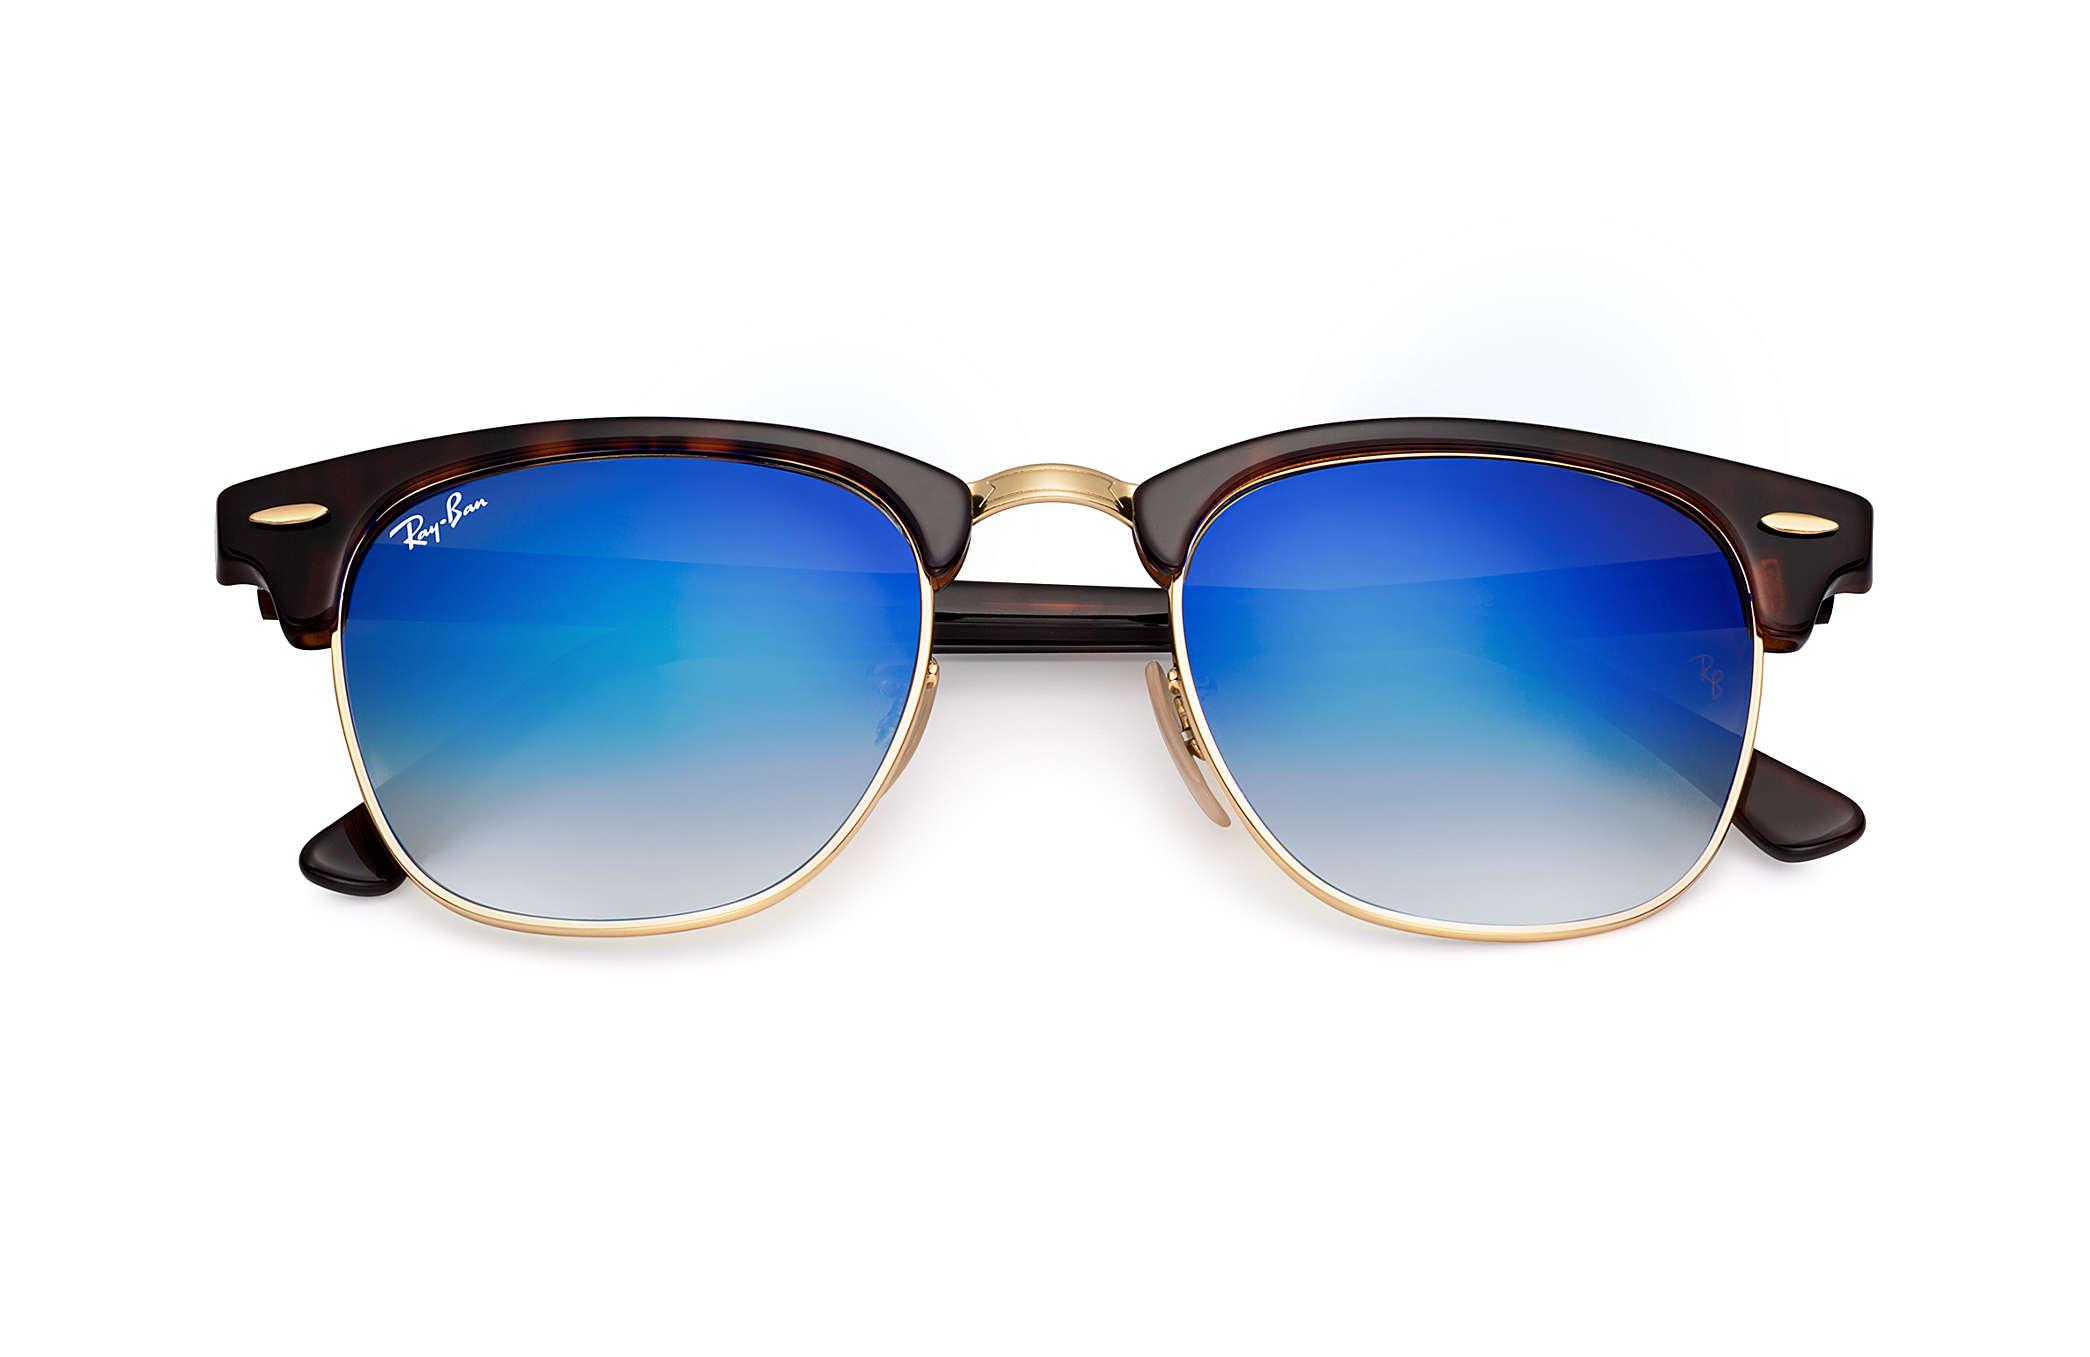 Ray-Ban Clubmaster Flash Lenses Gradient in Tortoise,Gold; Tortoise/Blue ( Blue) - Lyst